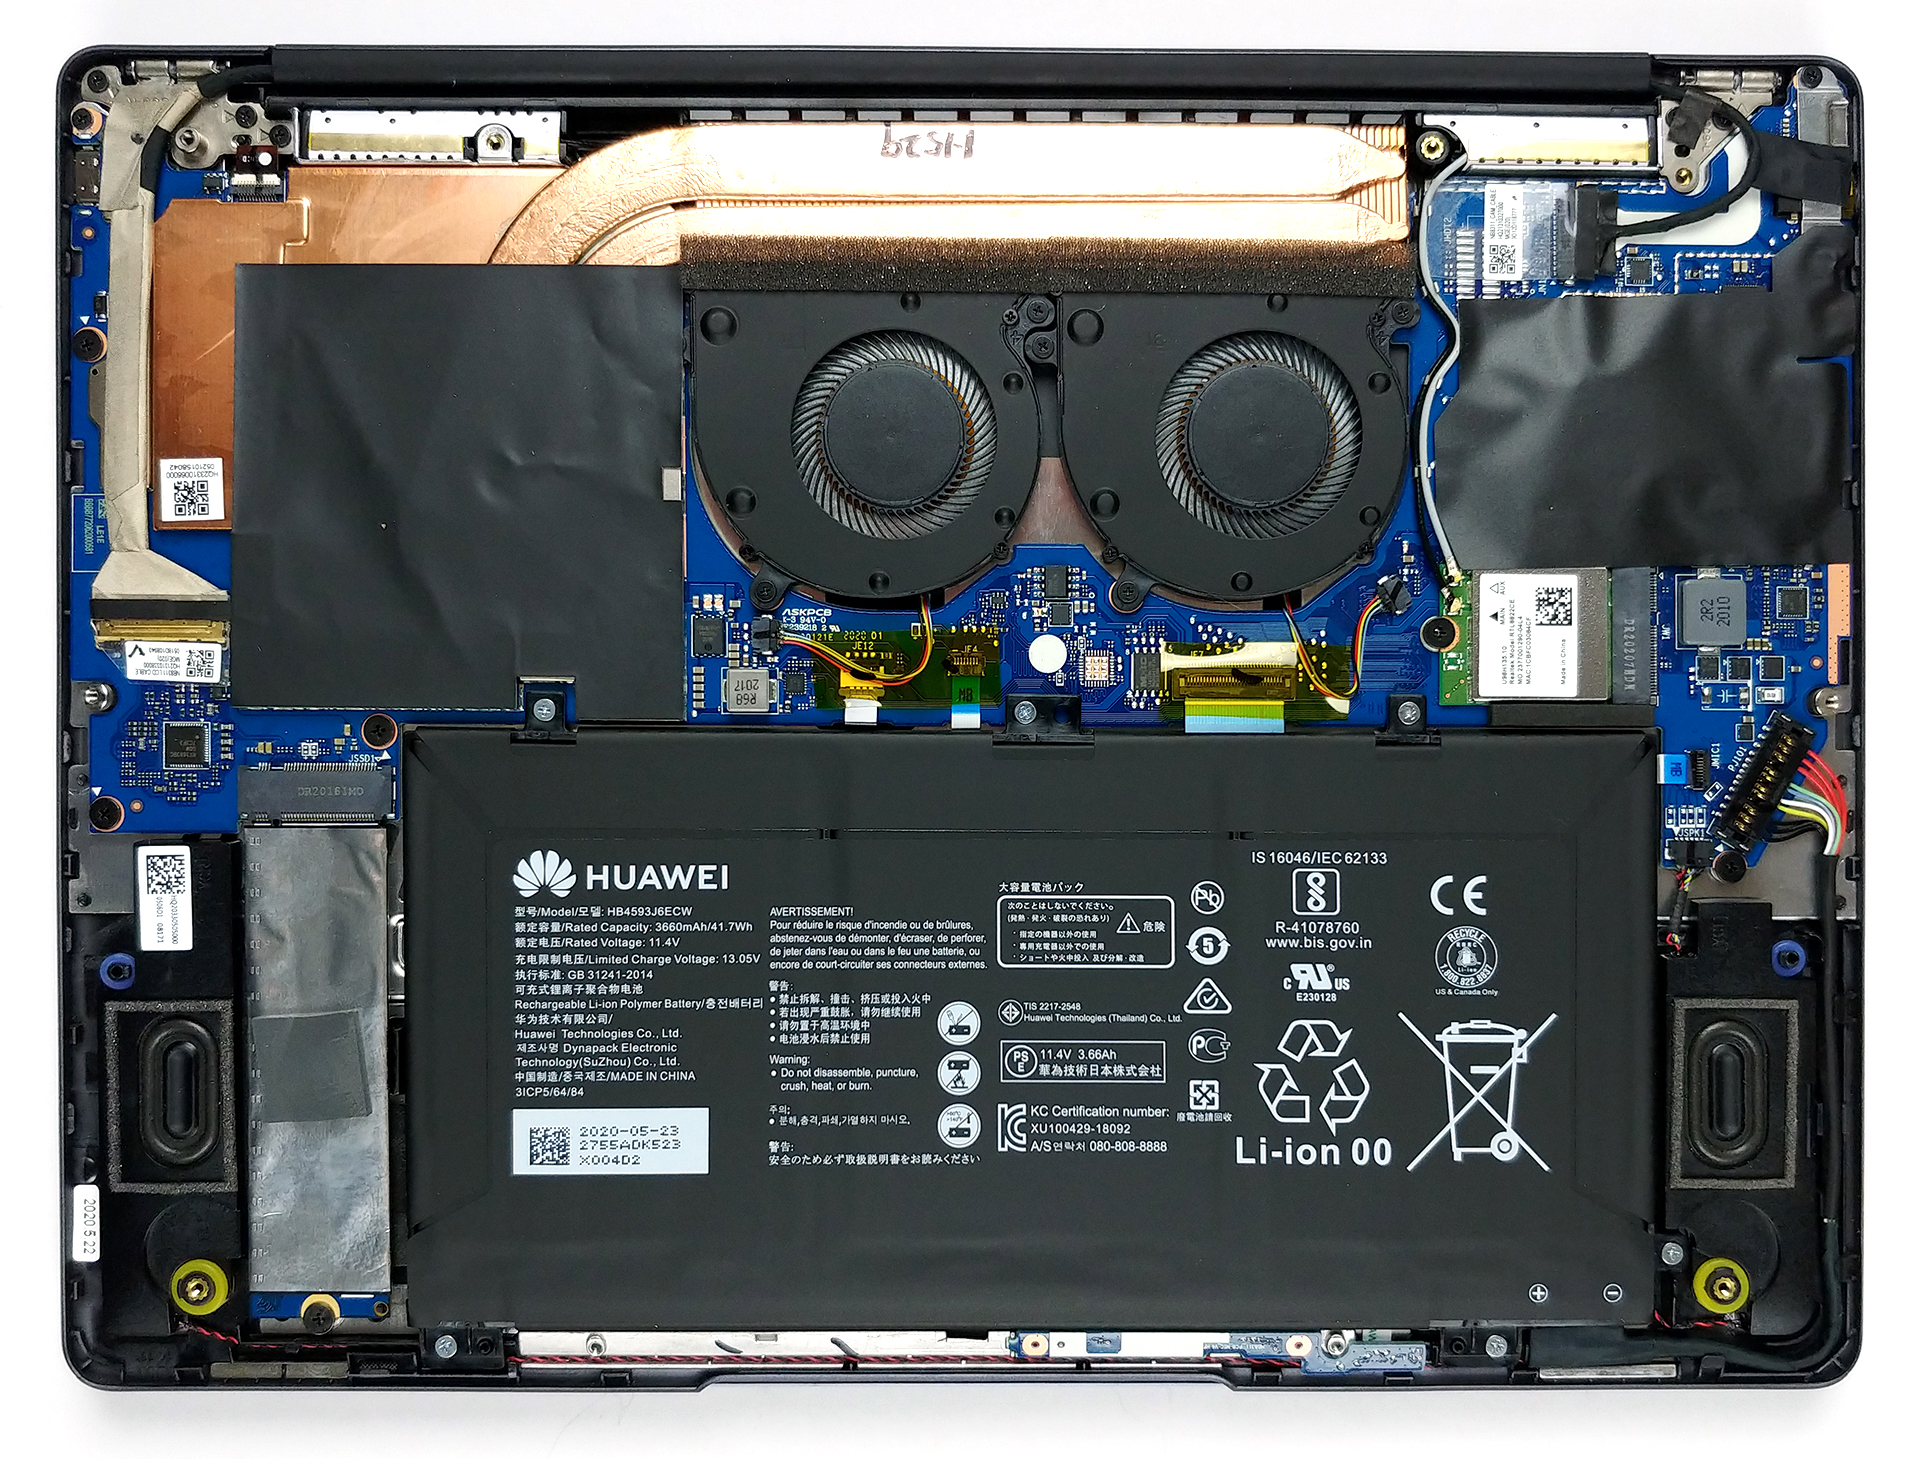 Inside Huawei MateBook 13 (2020) - disassembly and upgrade options